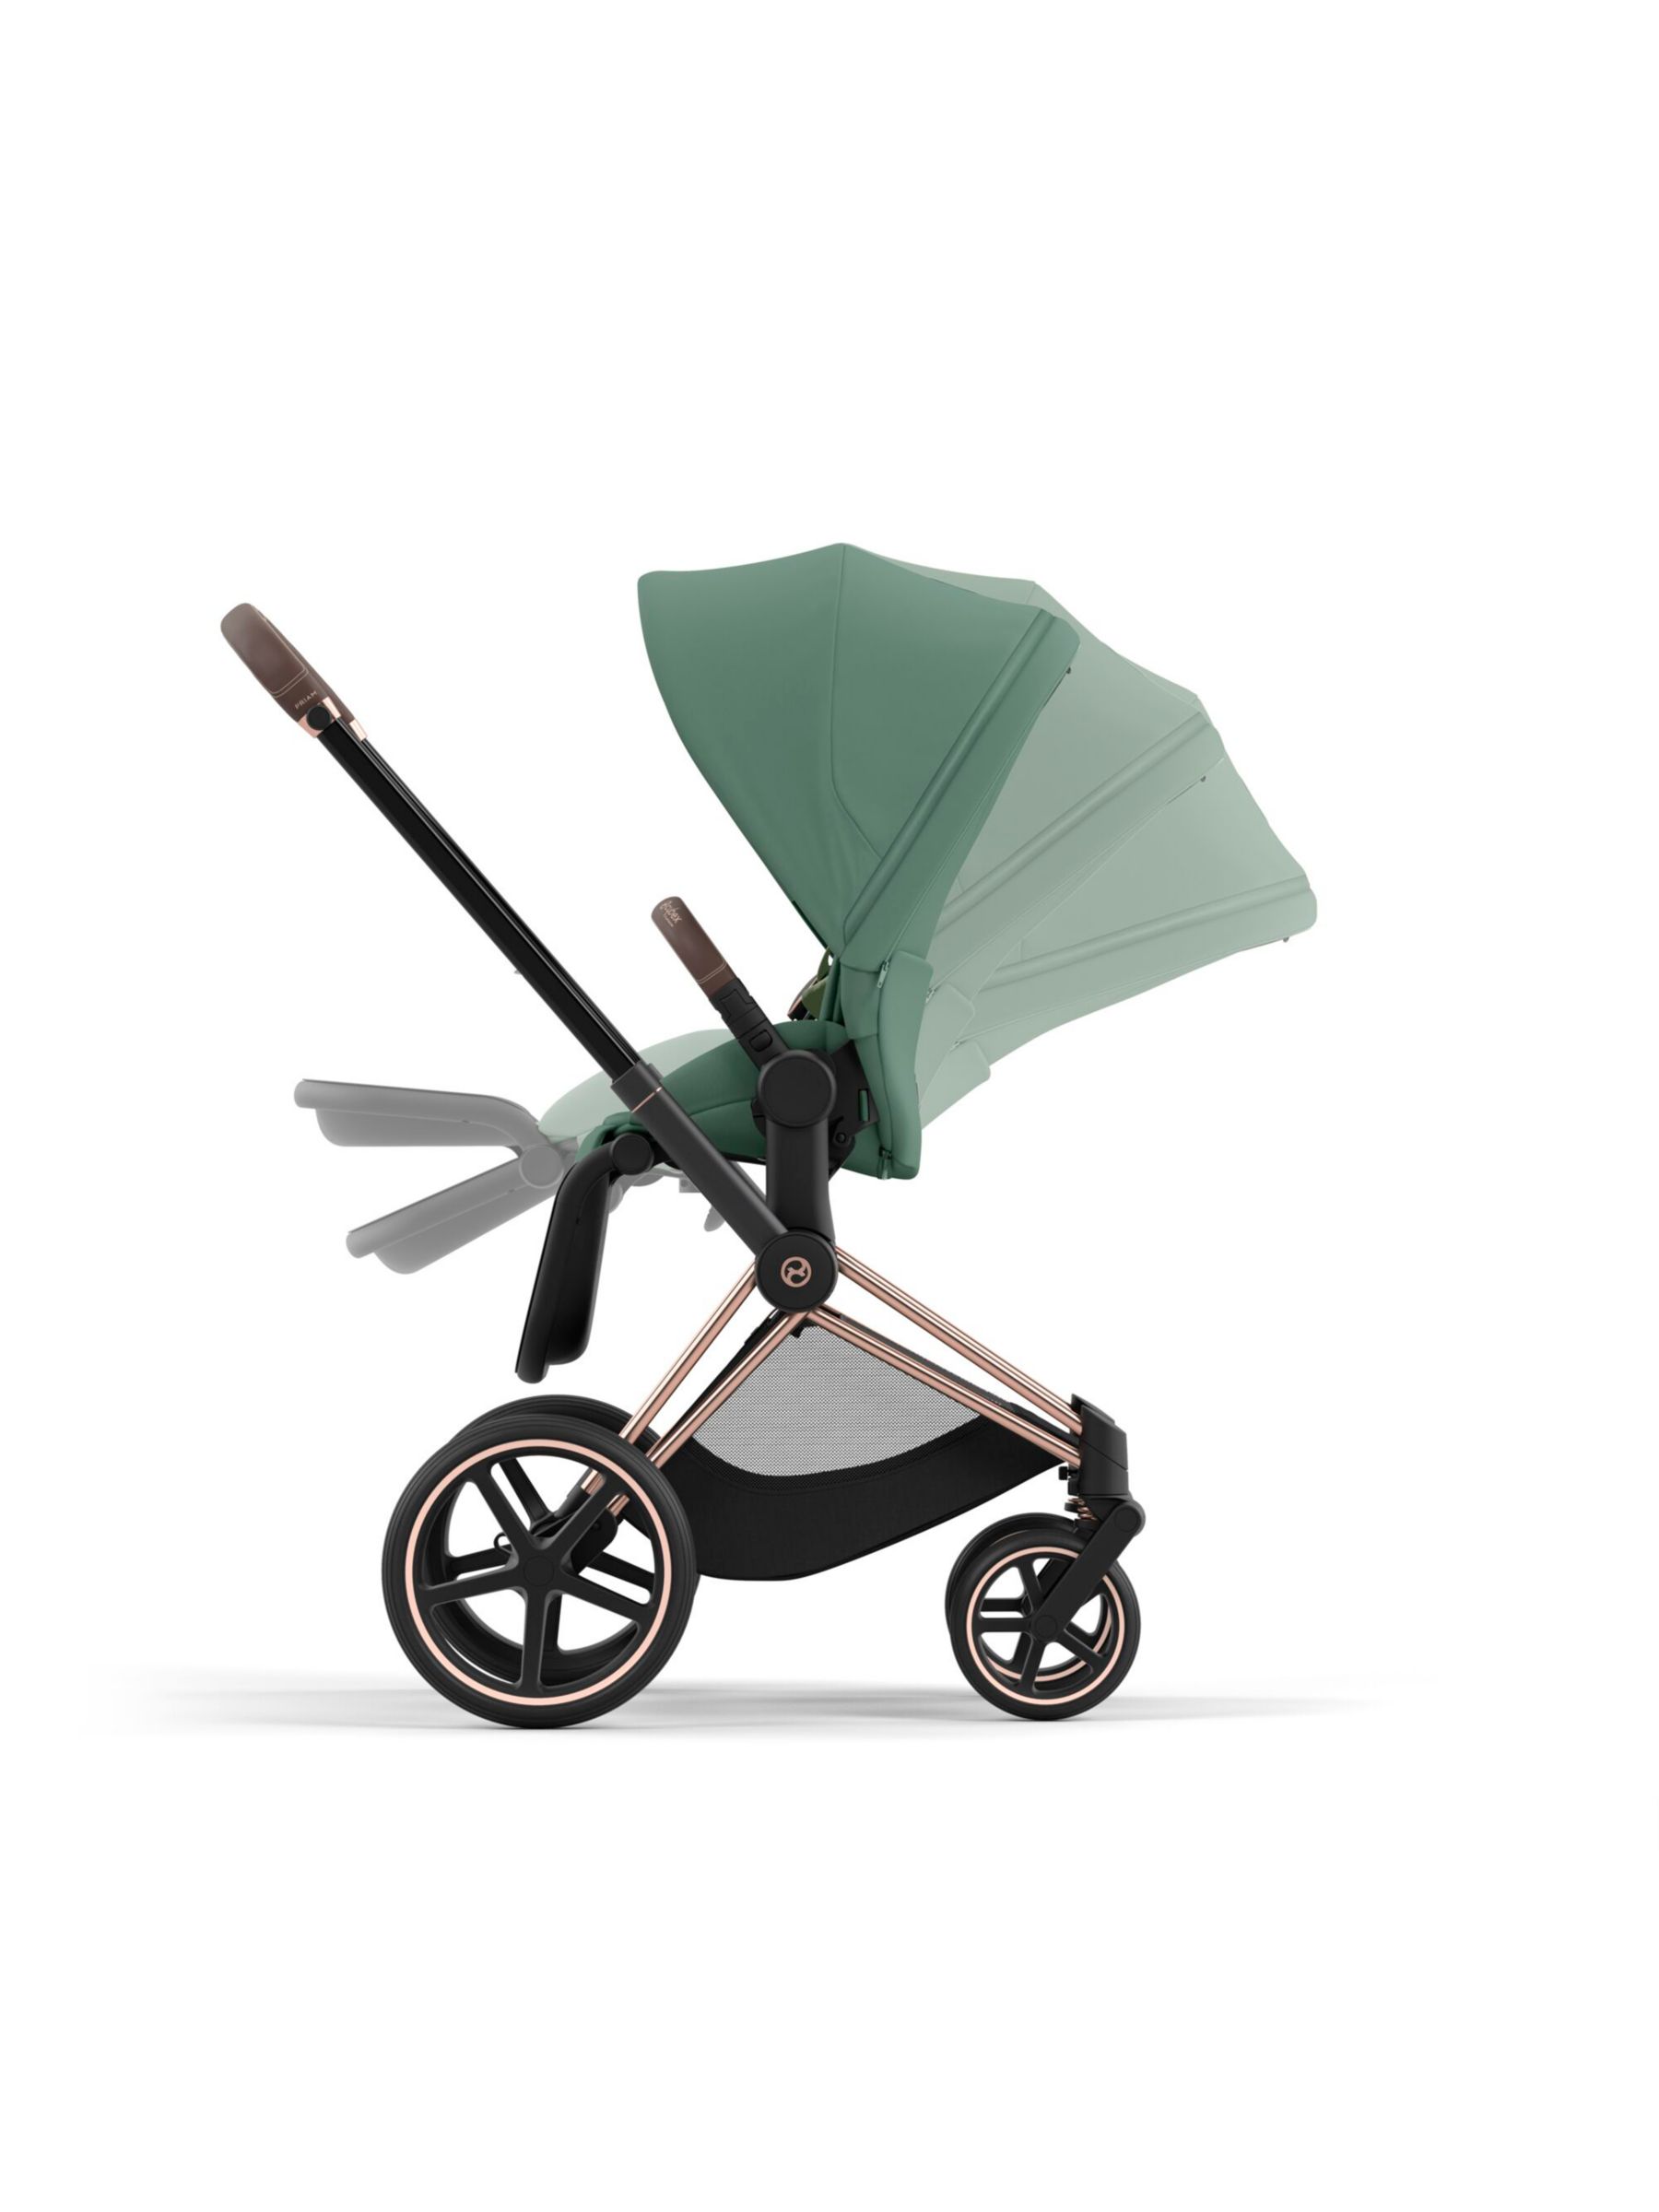 Cybex Priam Pushchair, Carrycot & Cloud T PLUS i-Size Car Seat with Base T Bundle, Rose Gold/ Leaf Green